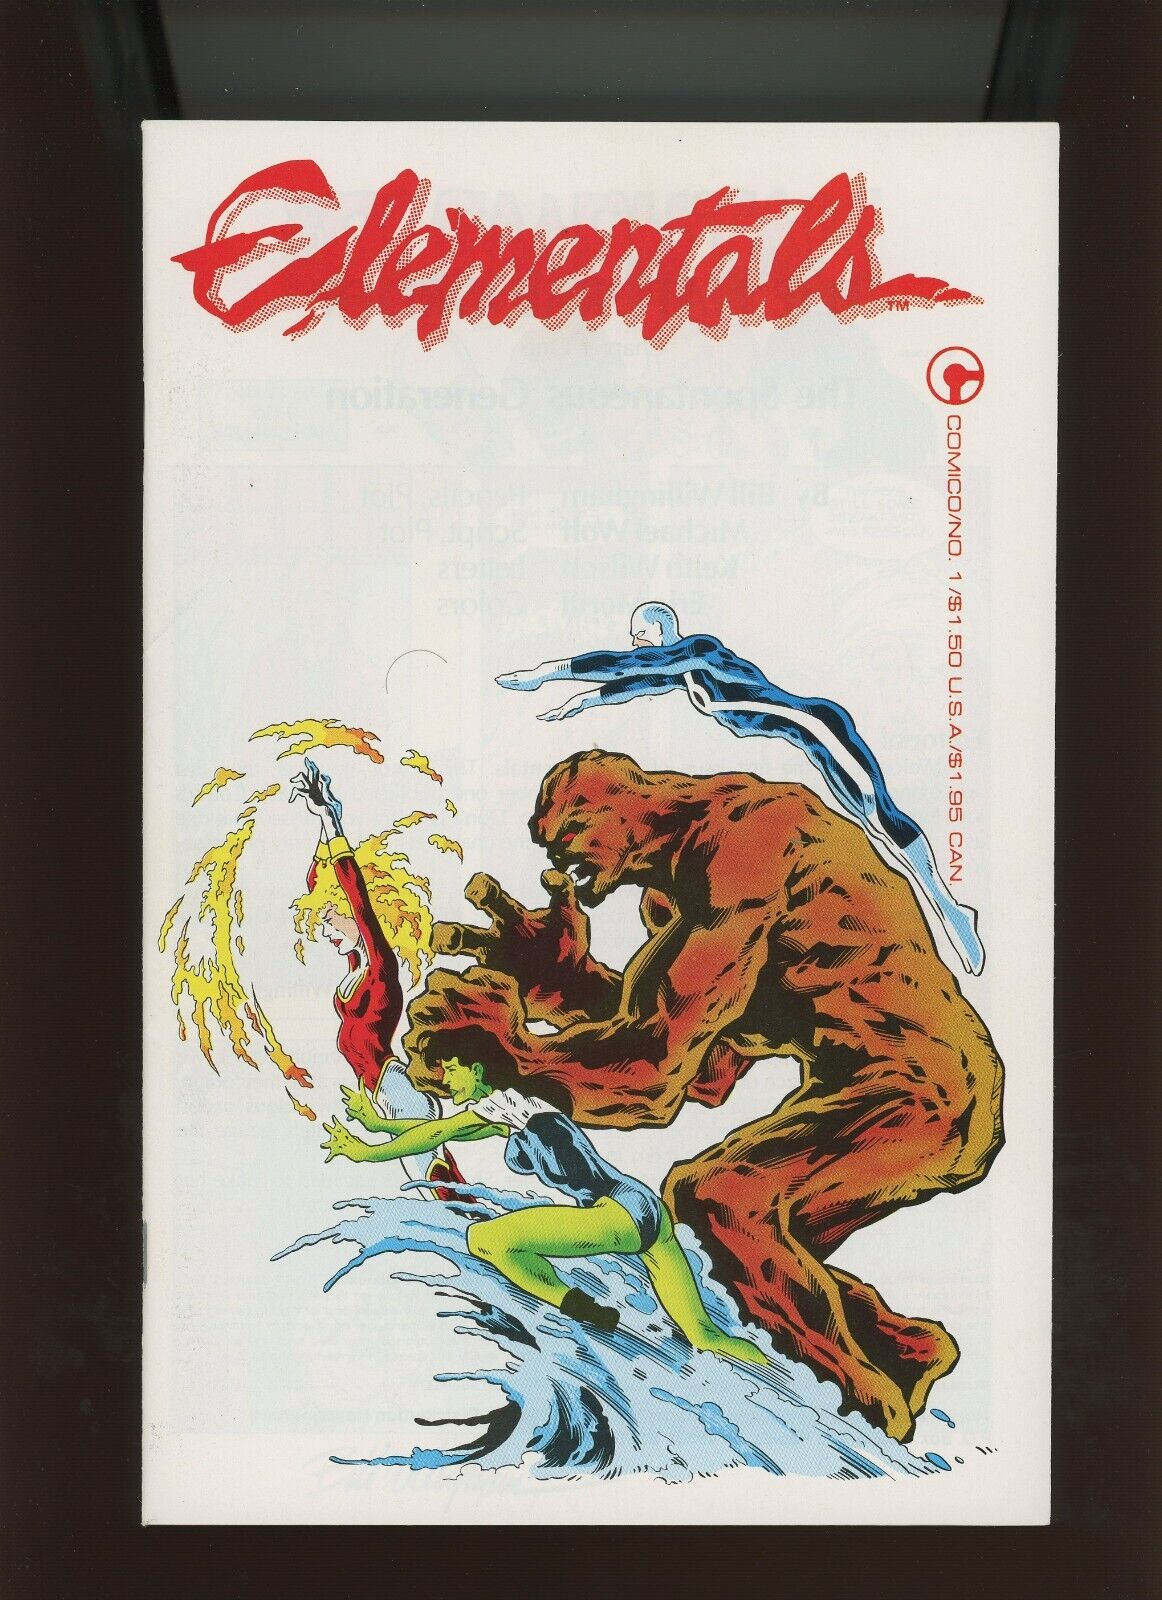 (1984) Elementals #1 - KEY ISSUE SIGNED BY BILL WILLINGHAM (9.0/9.2)